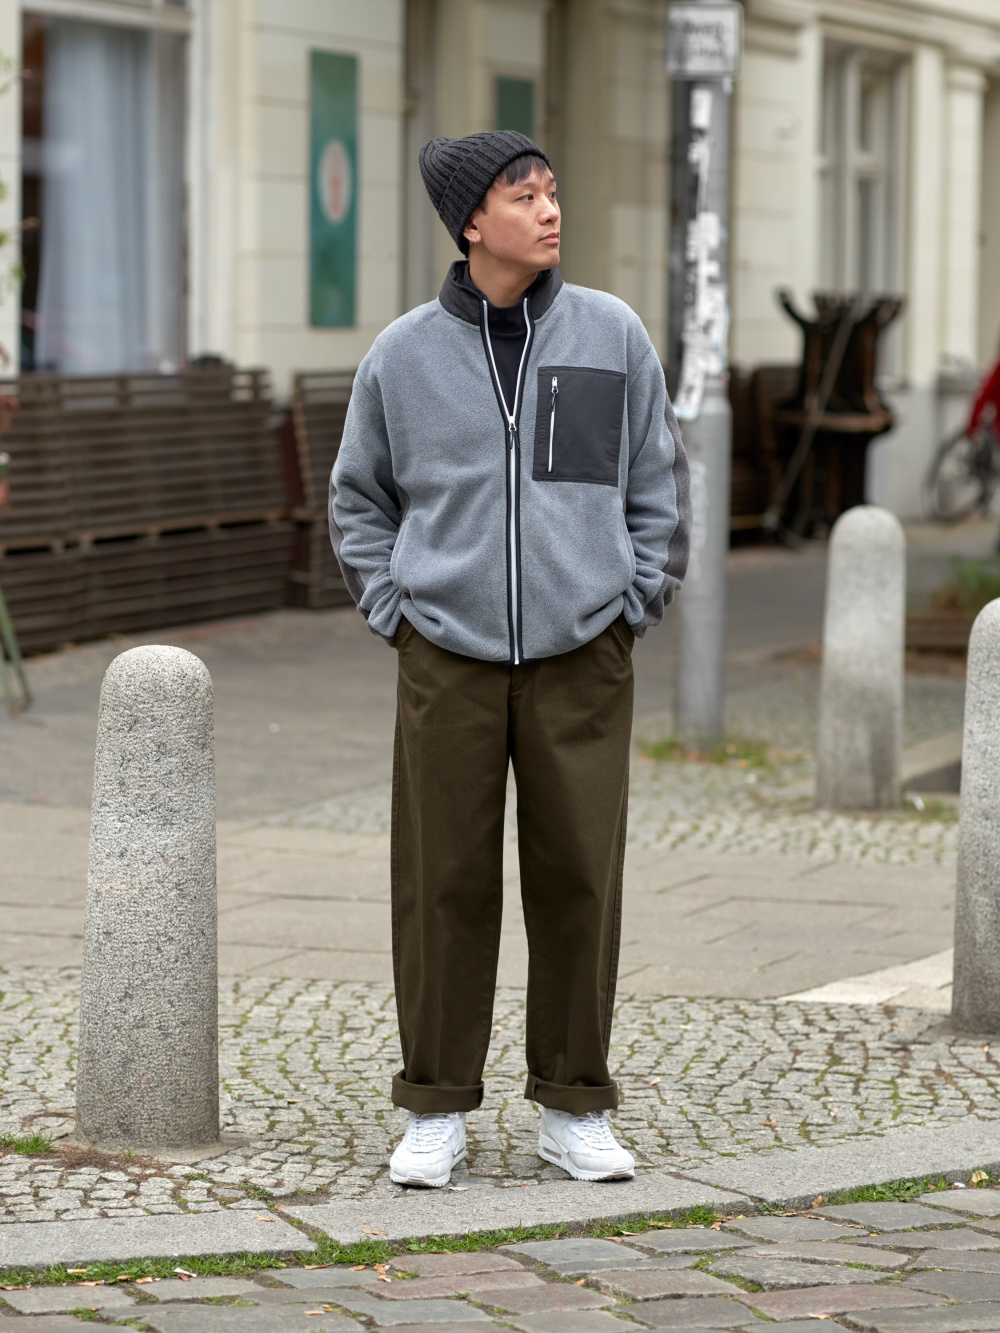 Check styling ideas for「Fleece Full-Zip Jacket、Wide-Fit Chino